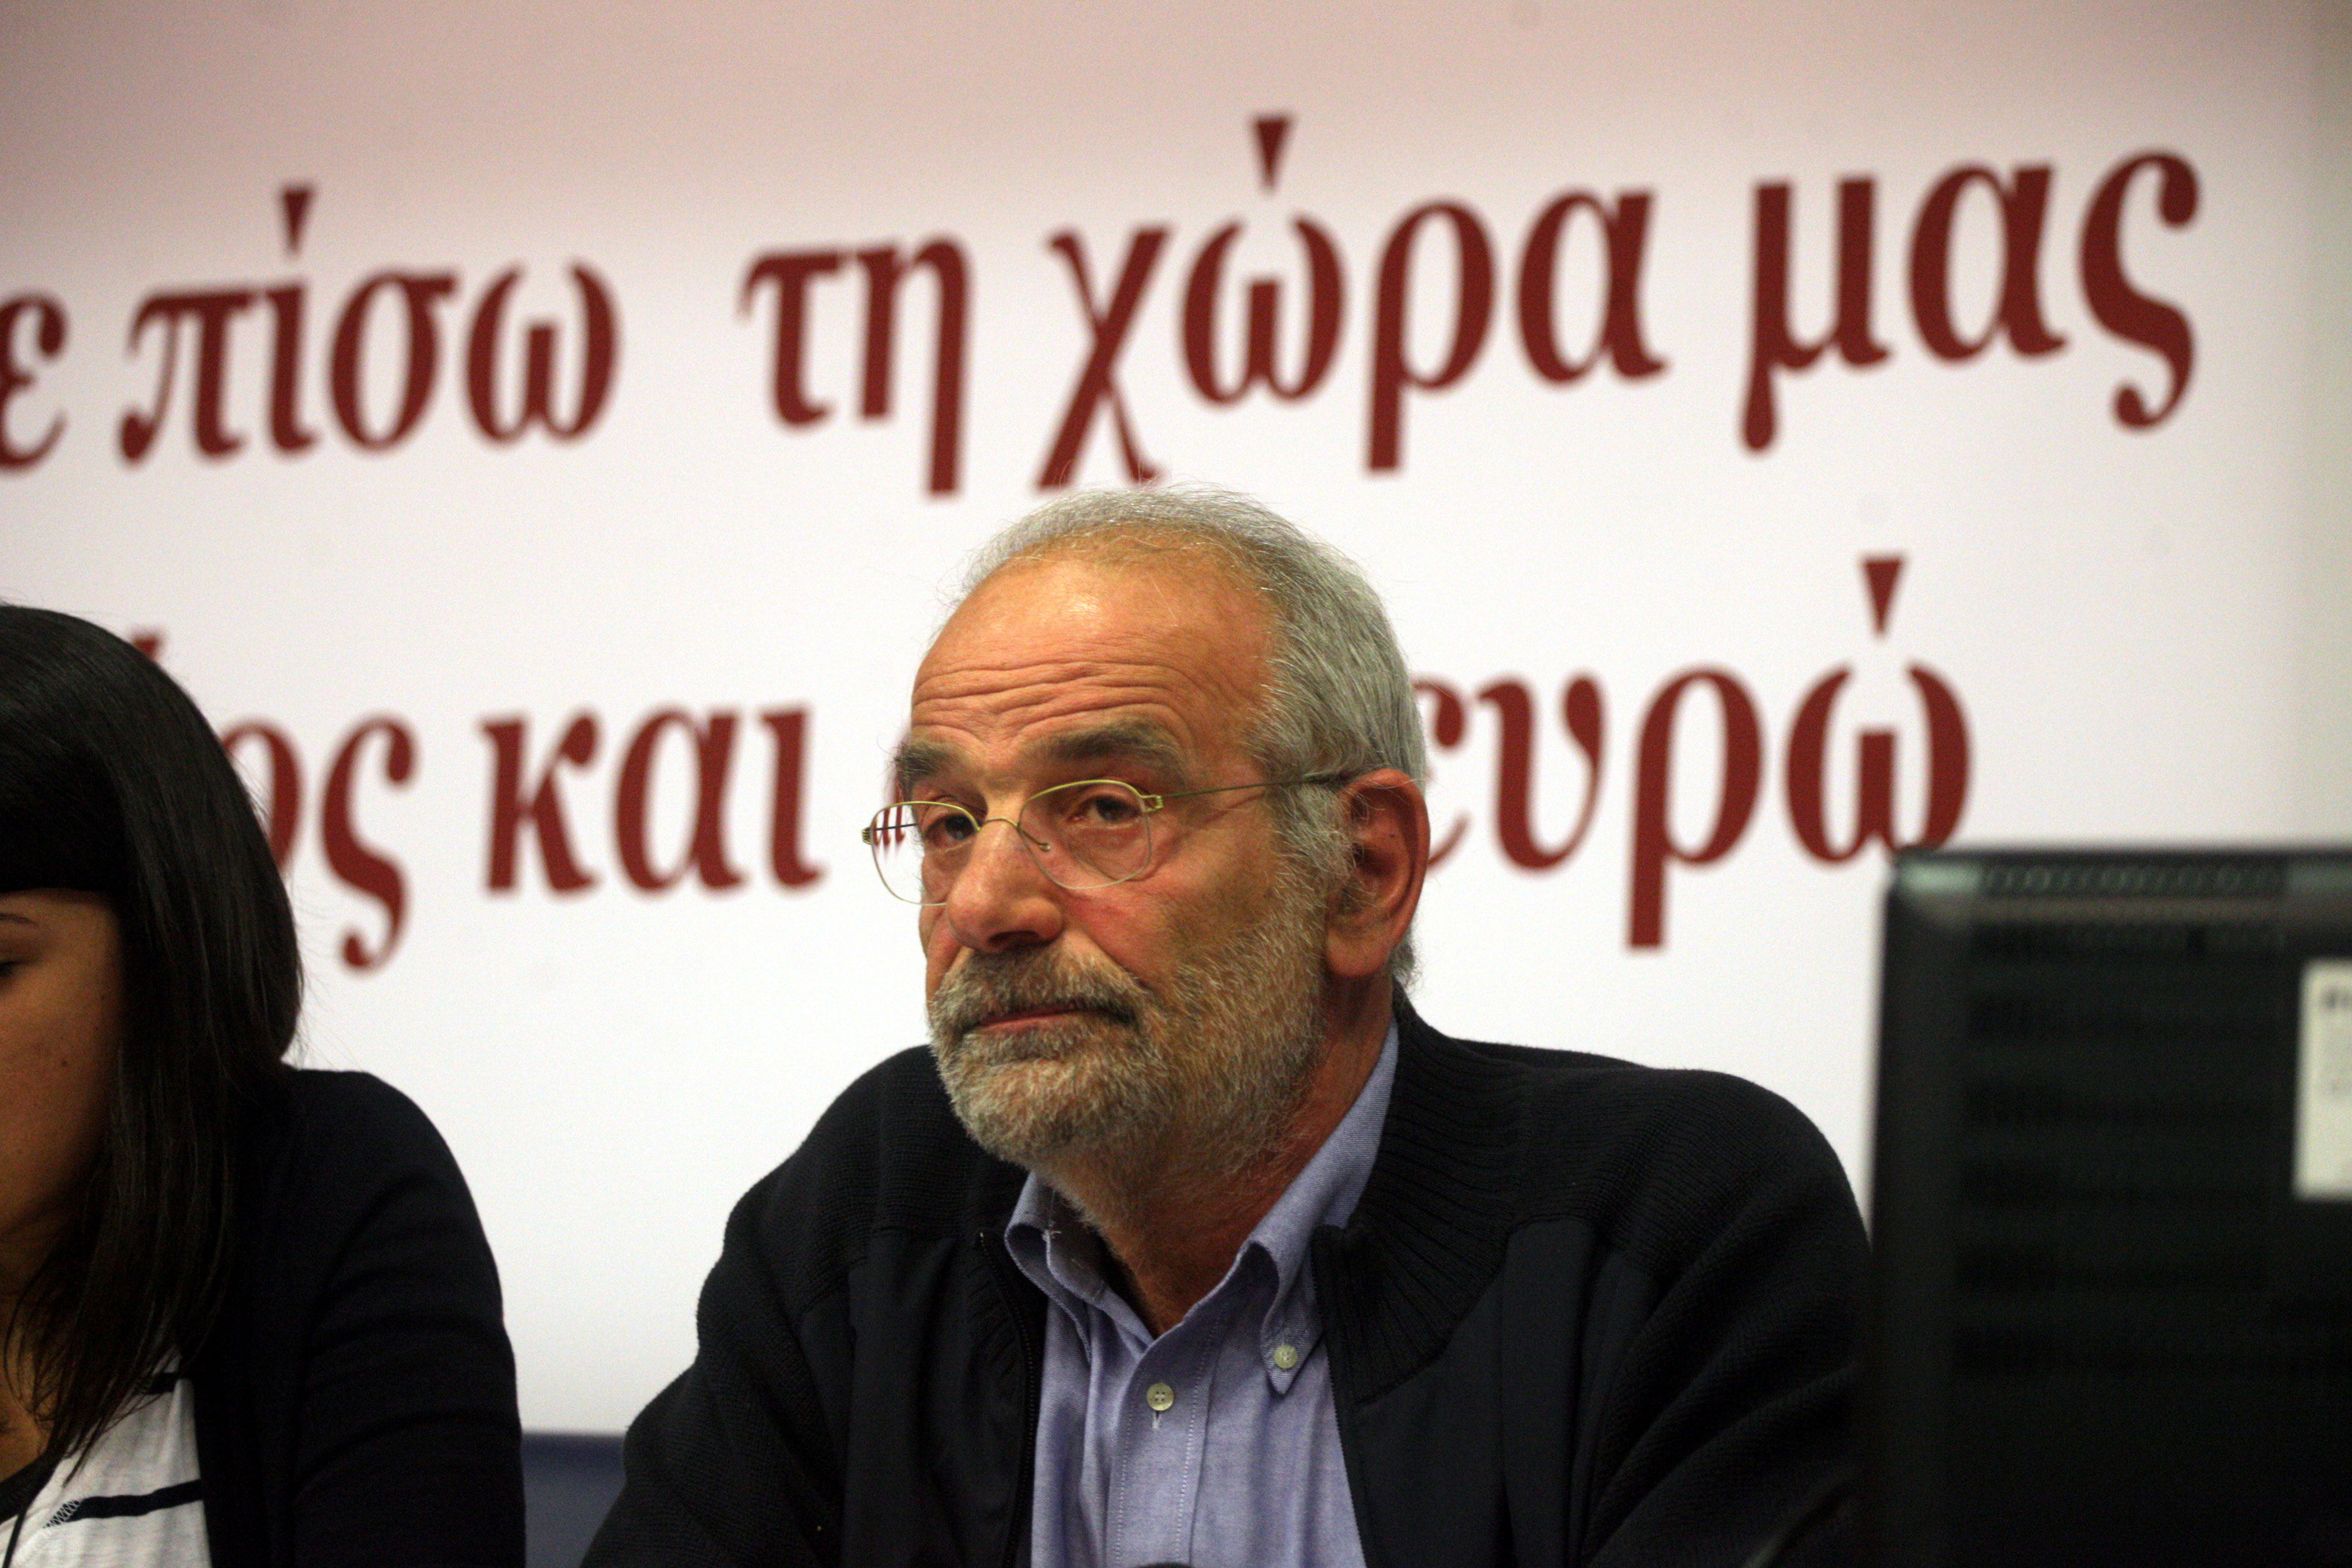 Alavanos: “Tsipras knows how to survive, but he is not honest”